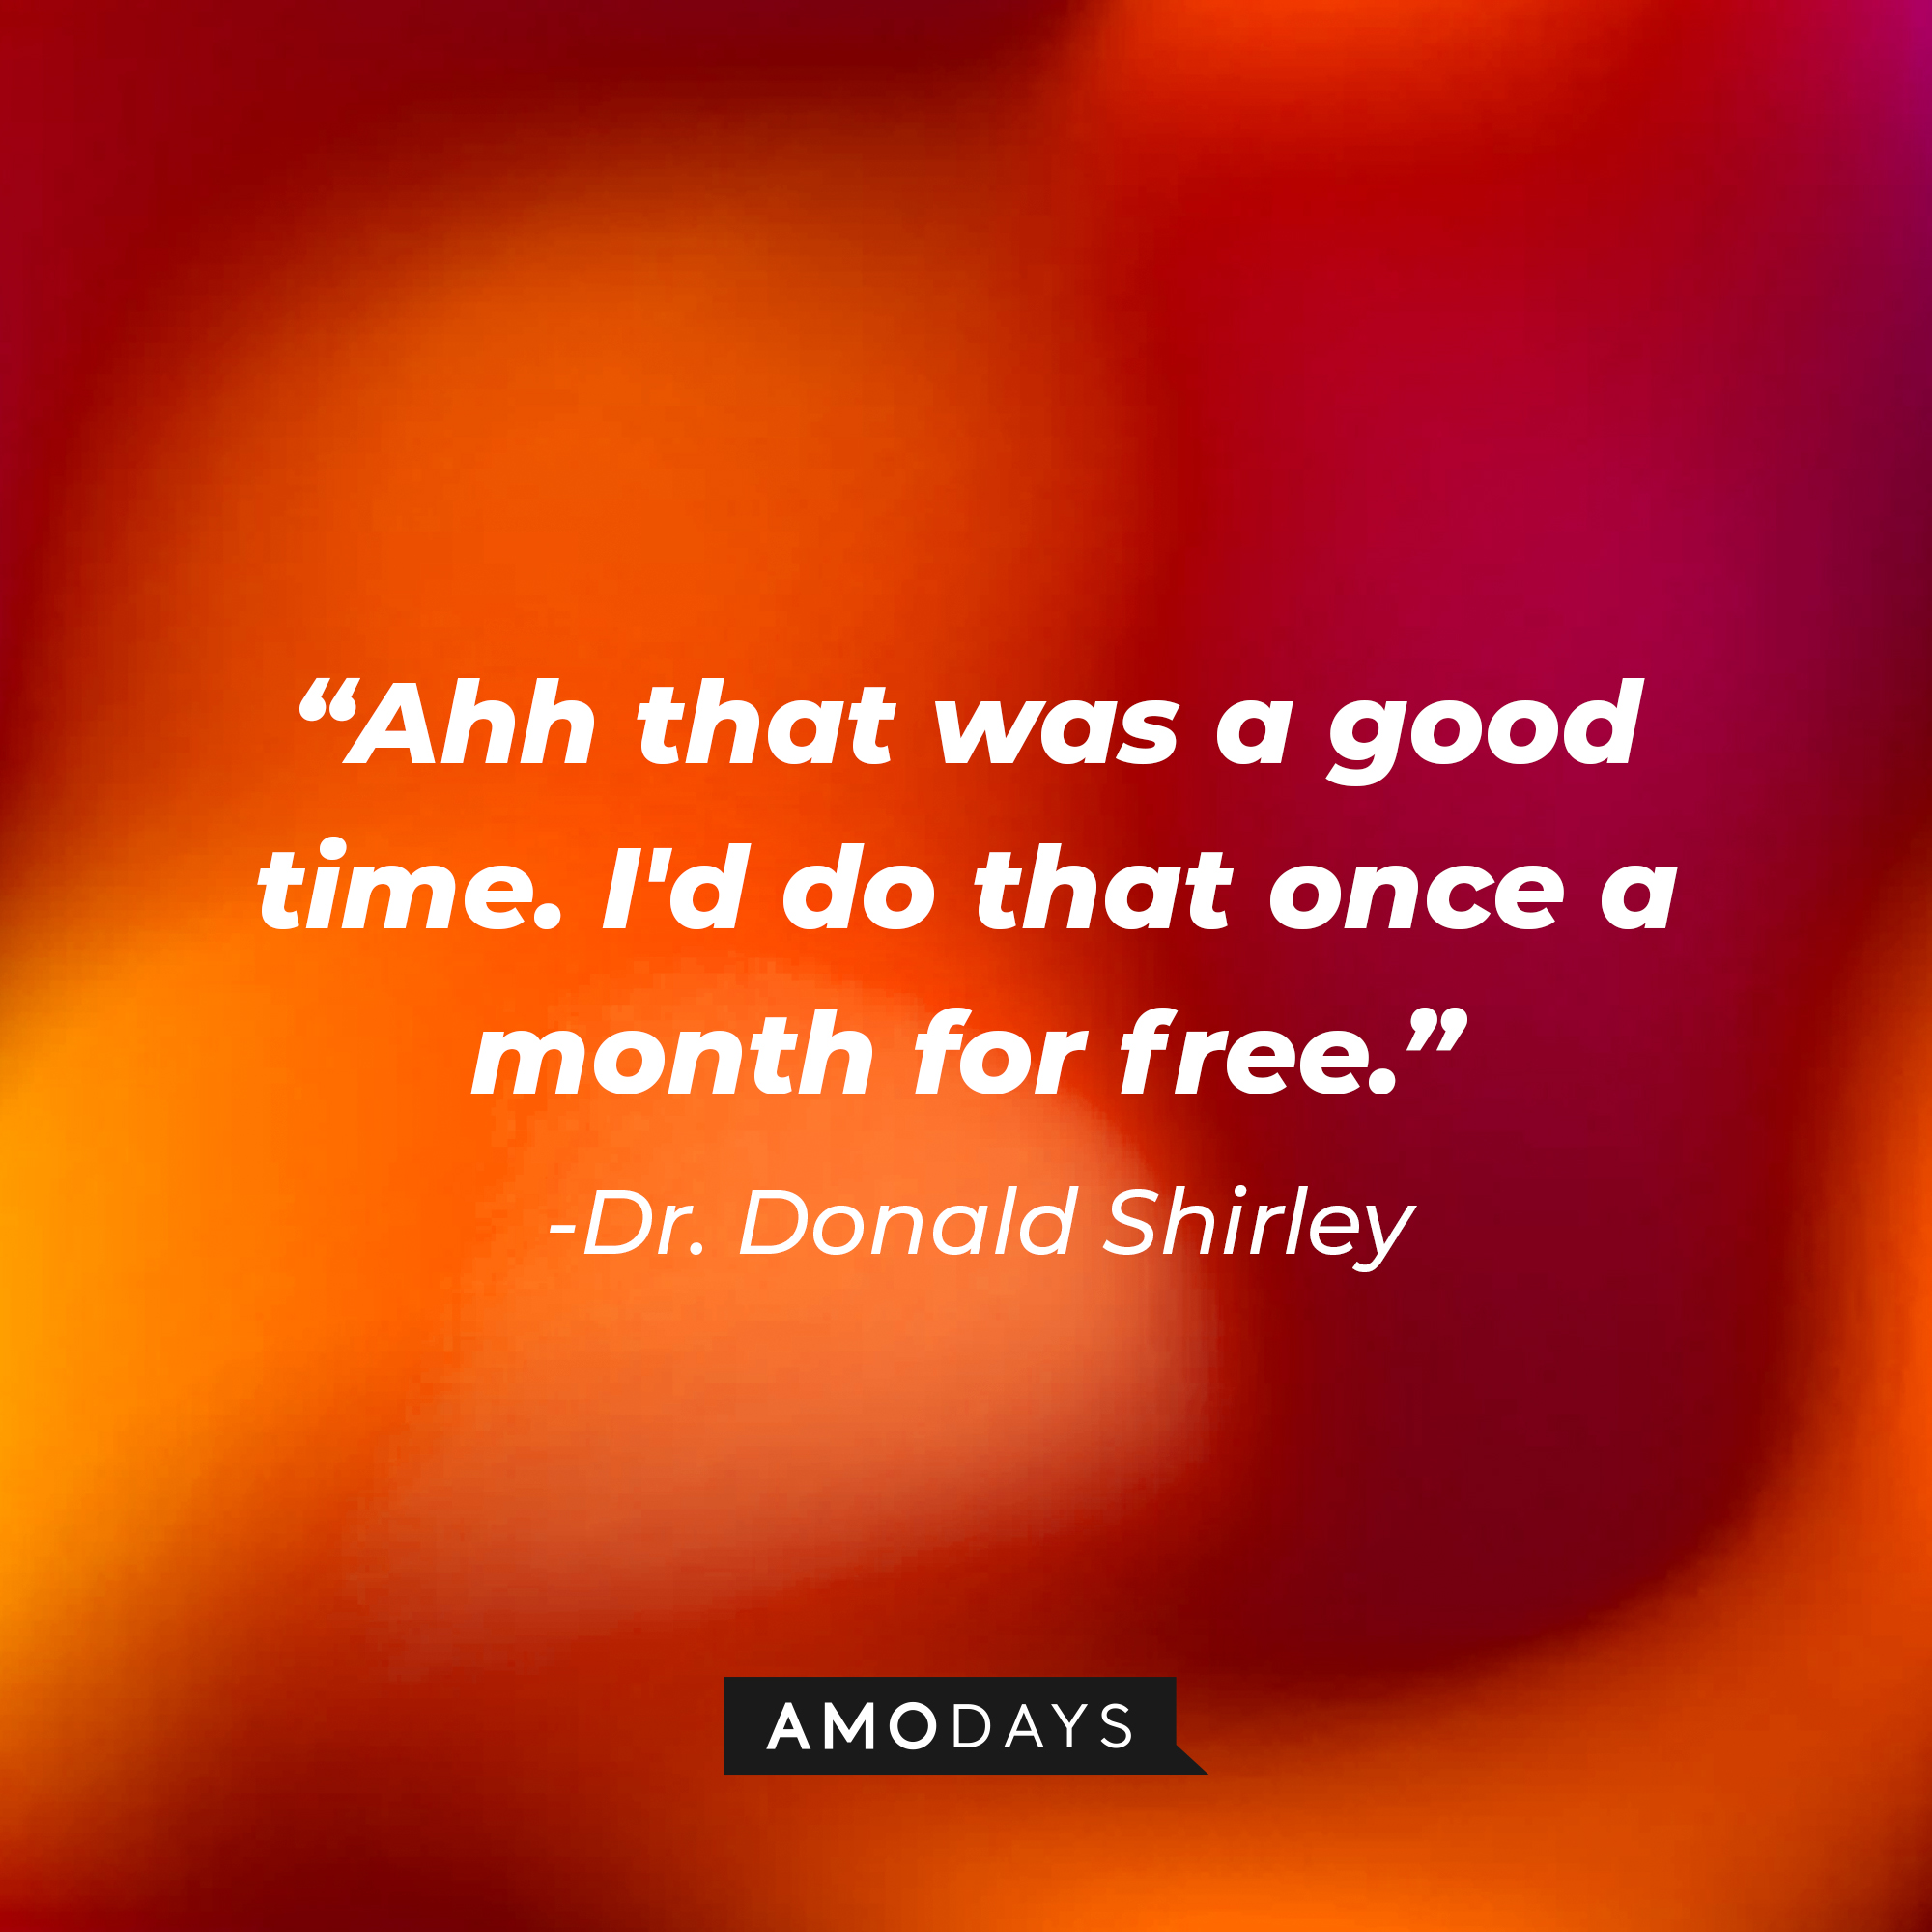 Dr. Donald Shirley's quote: “Ahh that was a good time. I'd do that once a month for free.” | Source: Amodays